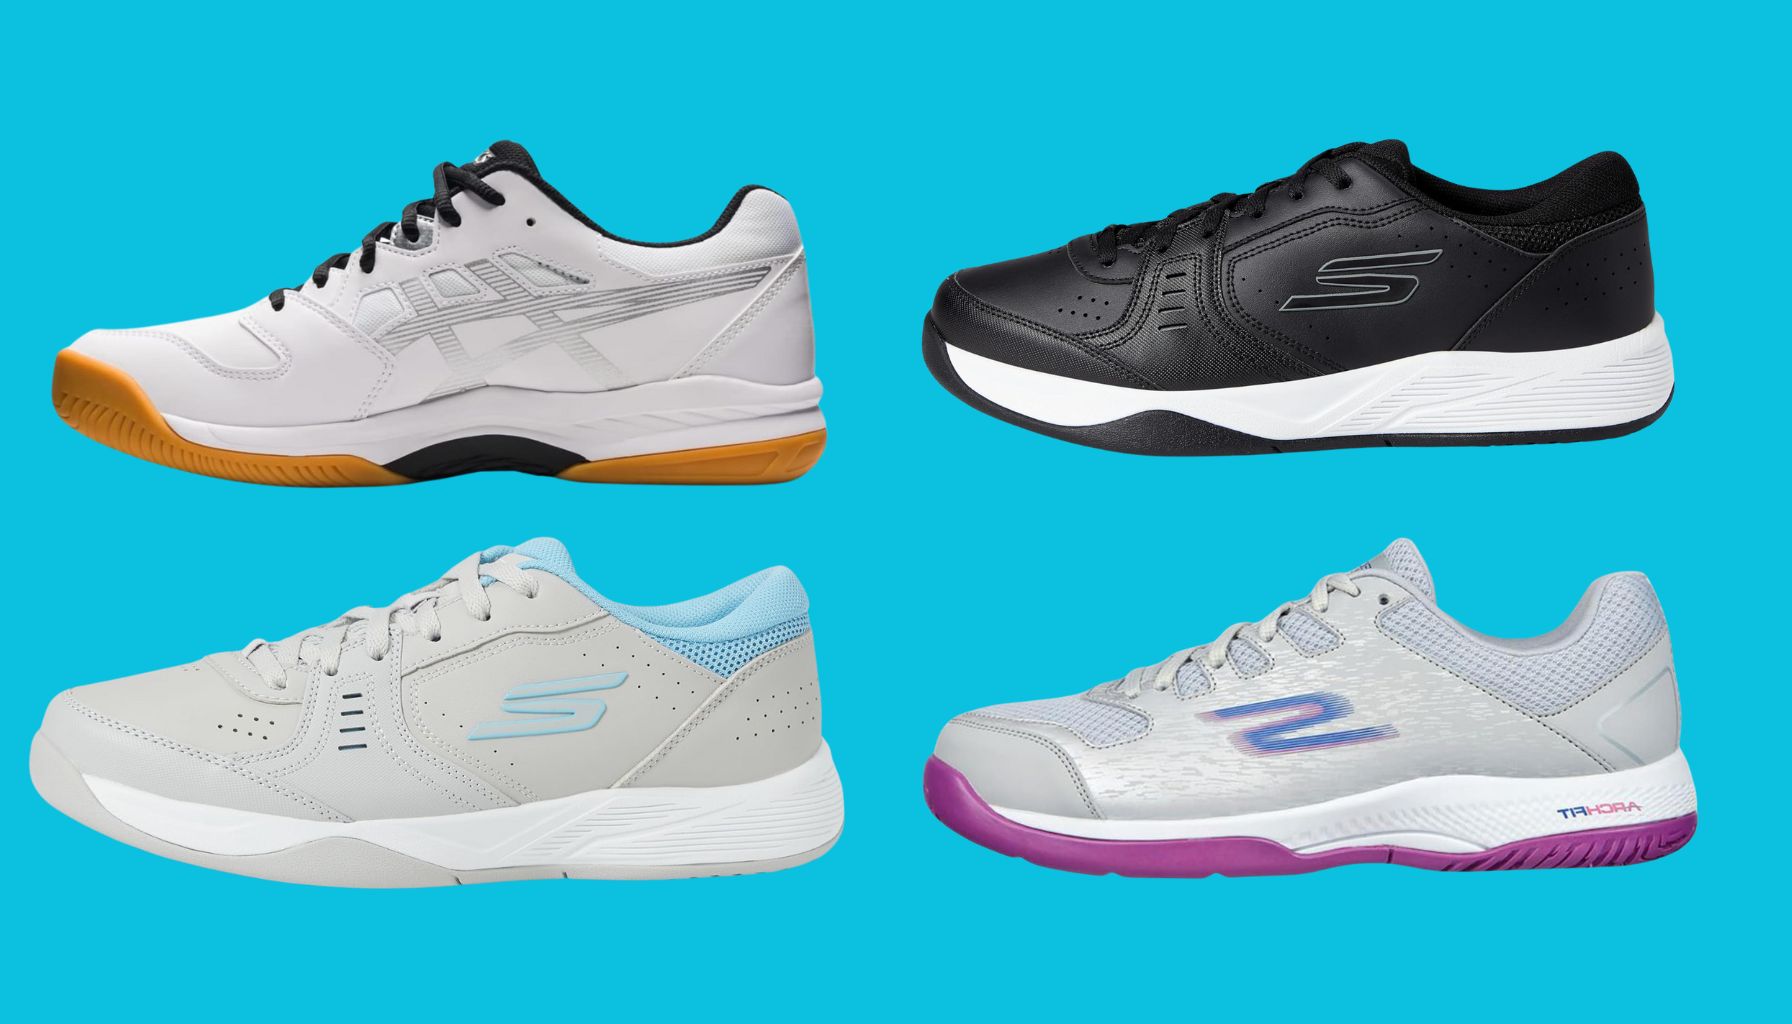 10 Best Indoor Pickleball Shoes: Recommended By Expert Pickleball Players